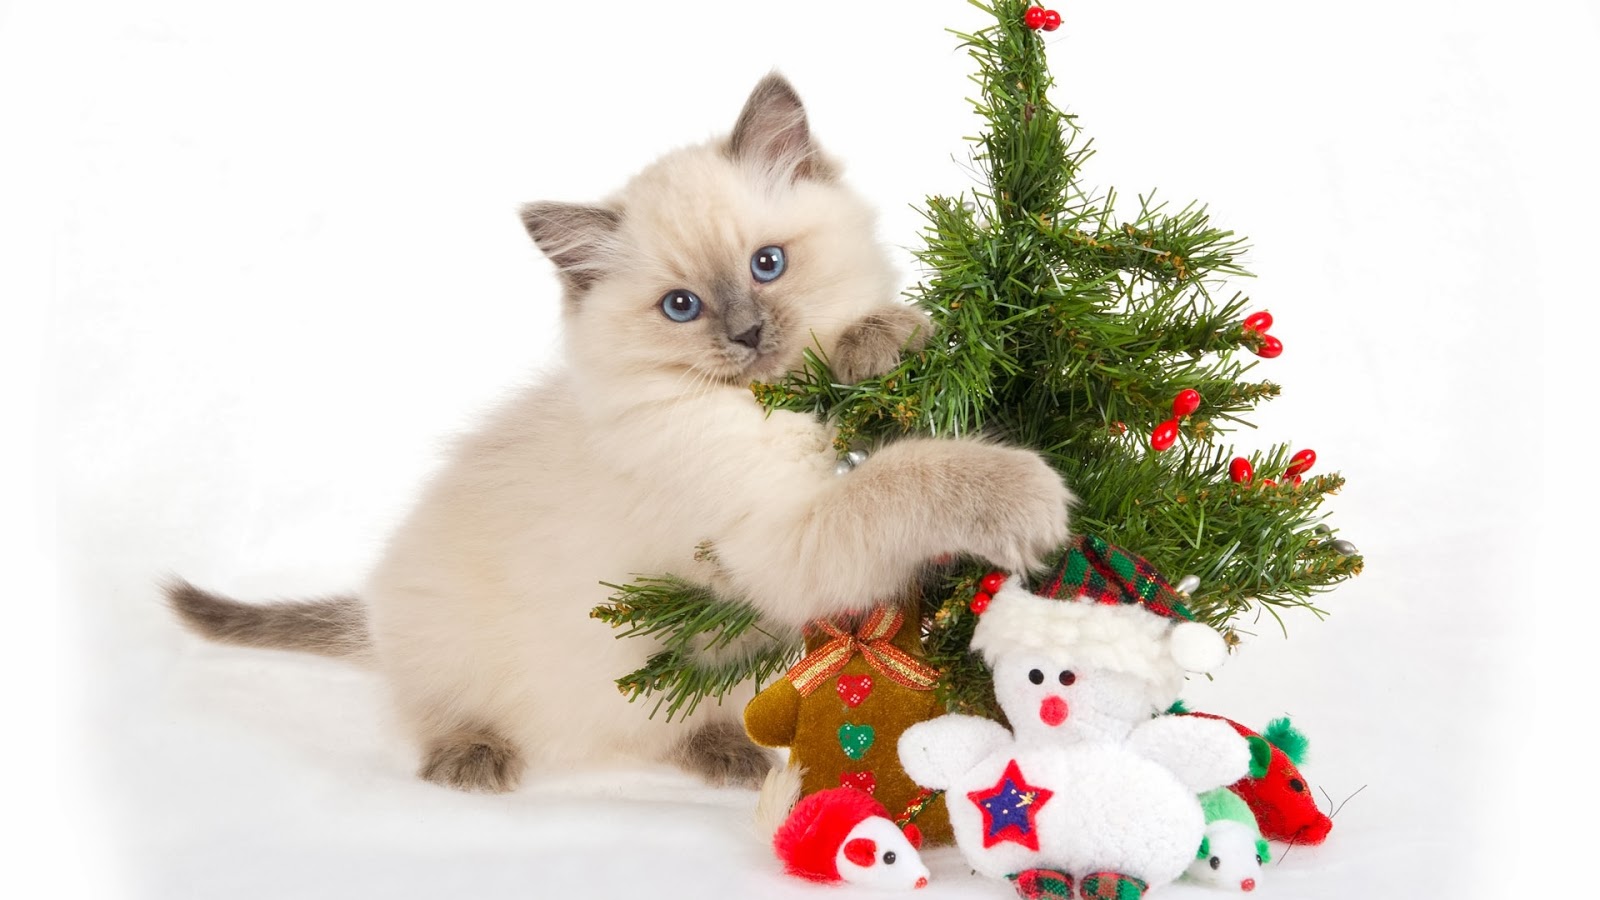 Cute Cats Christmas HD Wallpapers   HD Wallpapers Blog 1600x900